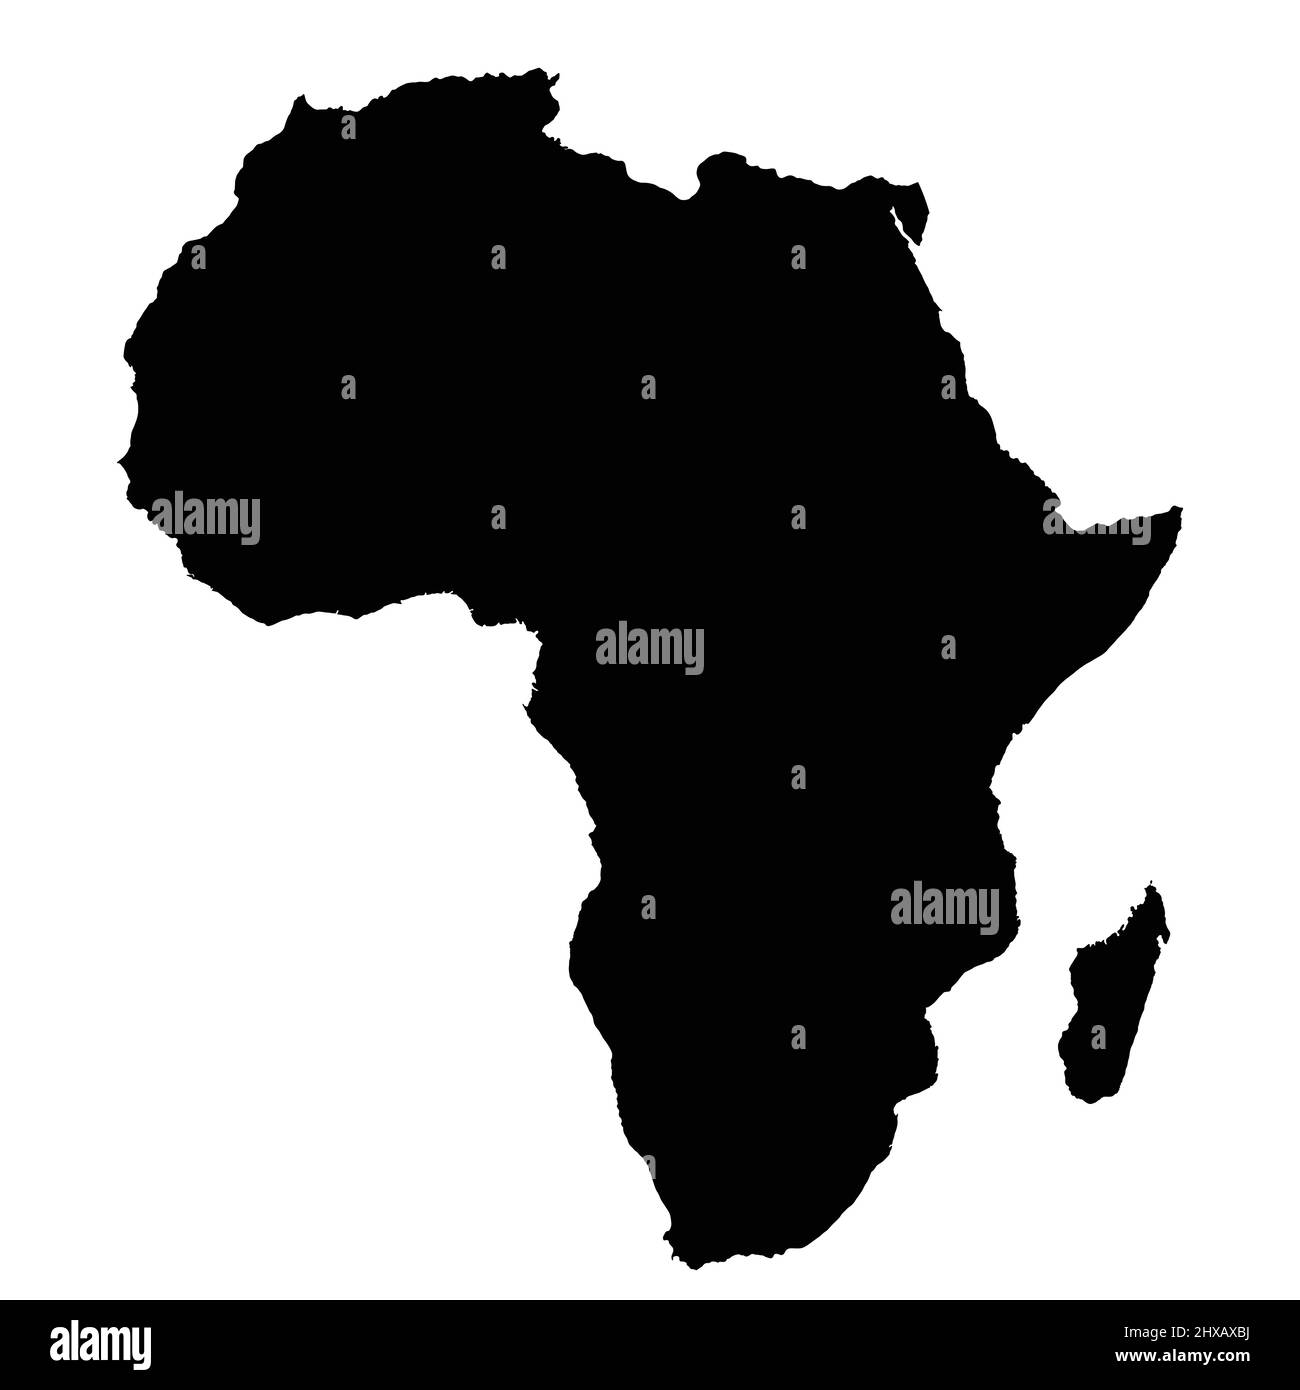 Map Of Africa Sign Silhouette World Map Globe Vector Illustration Isolated On White 0068